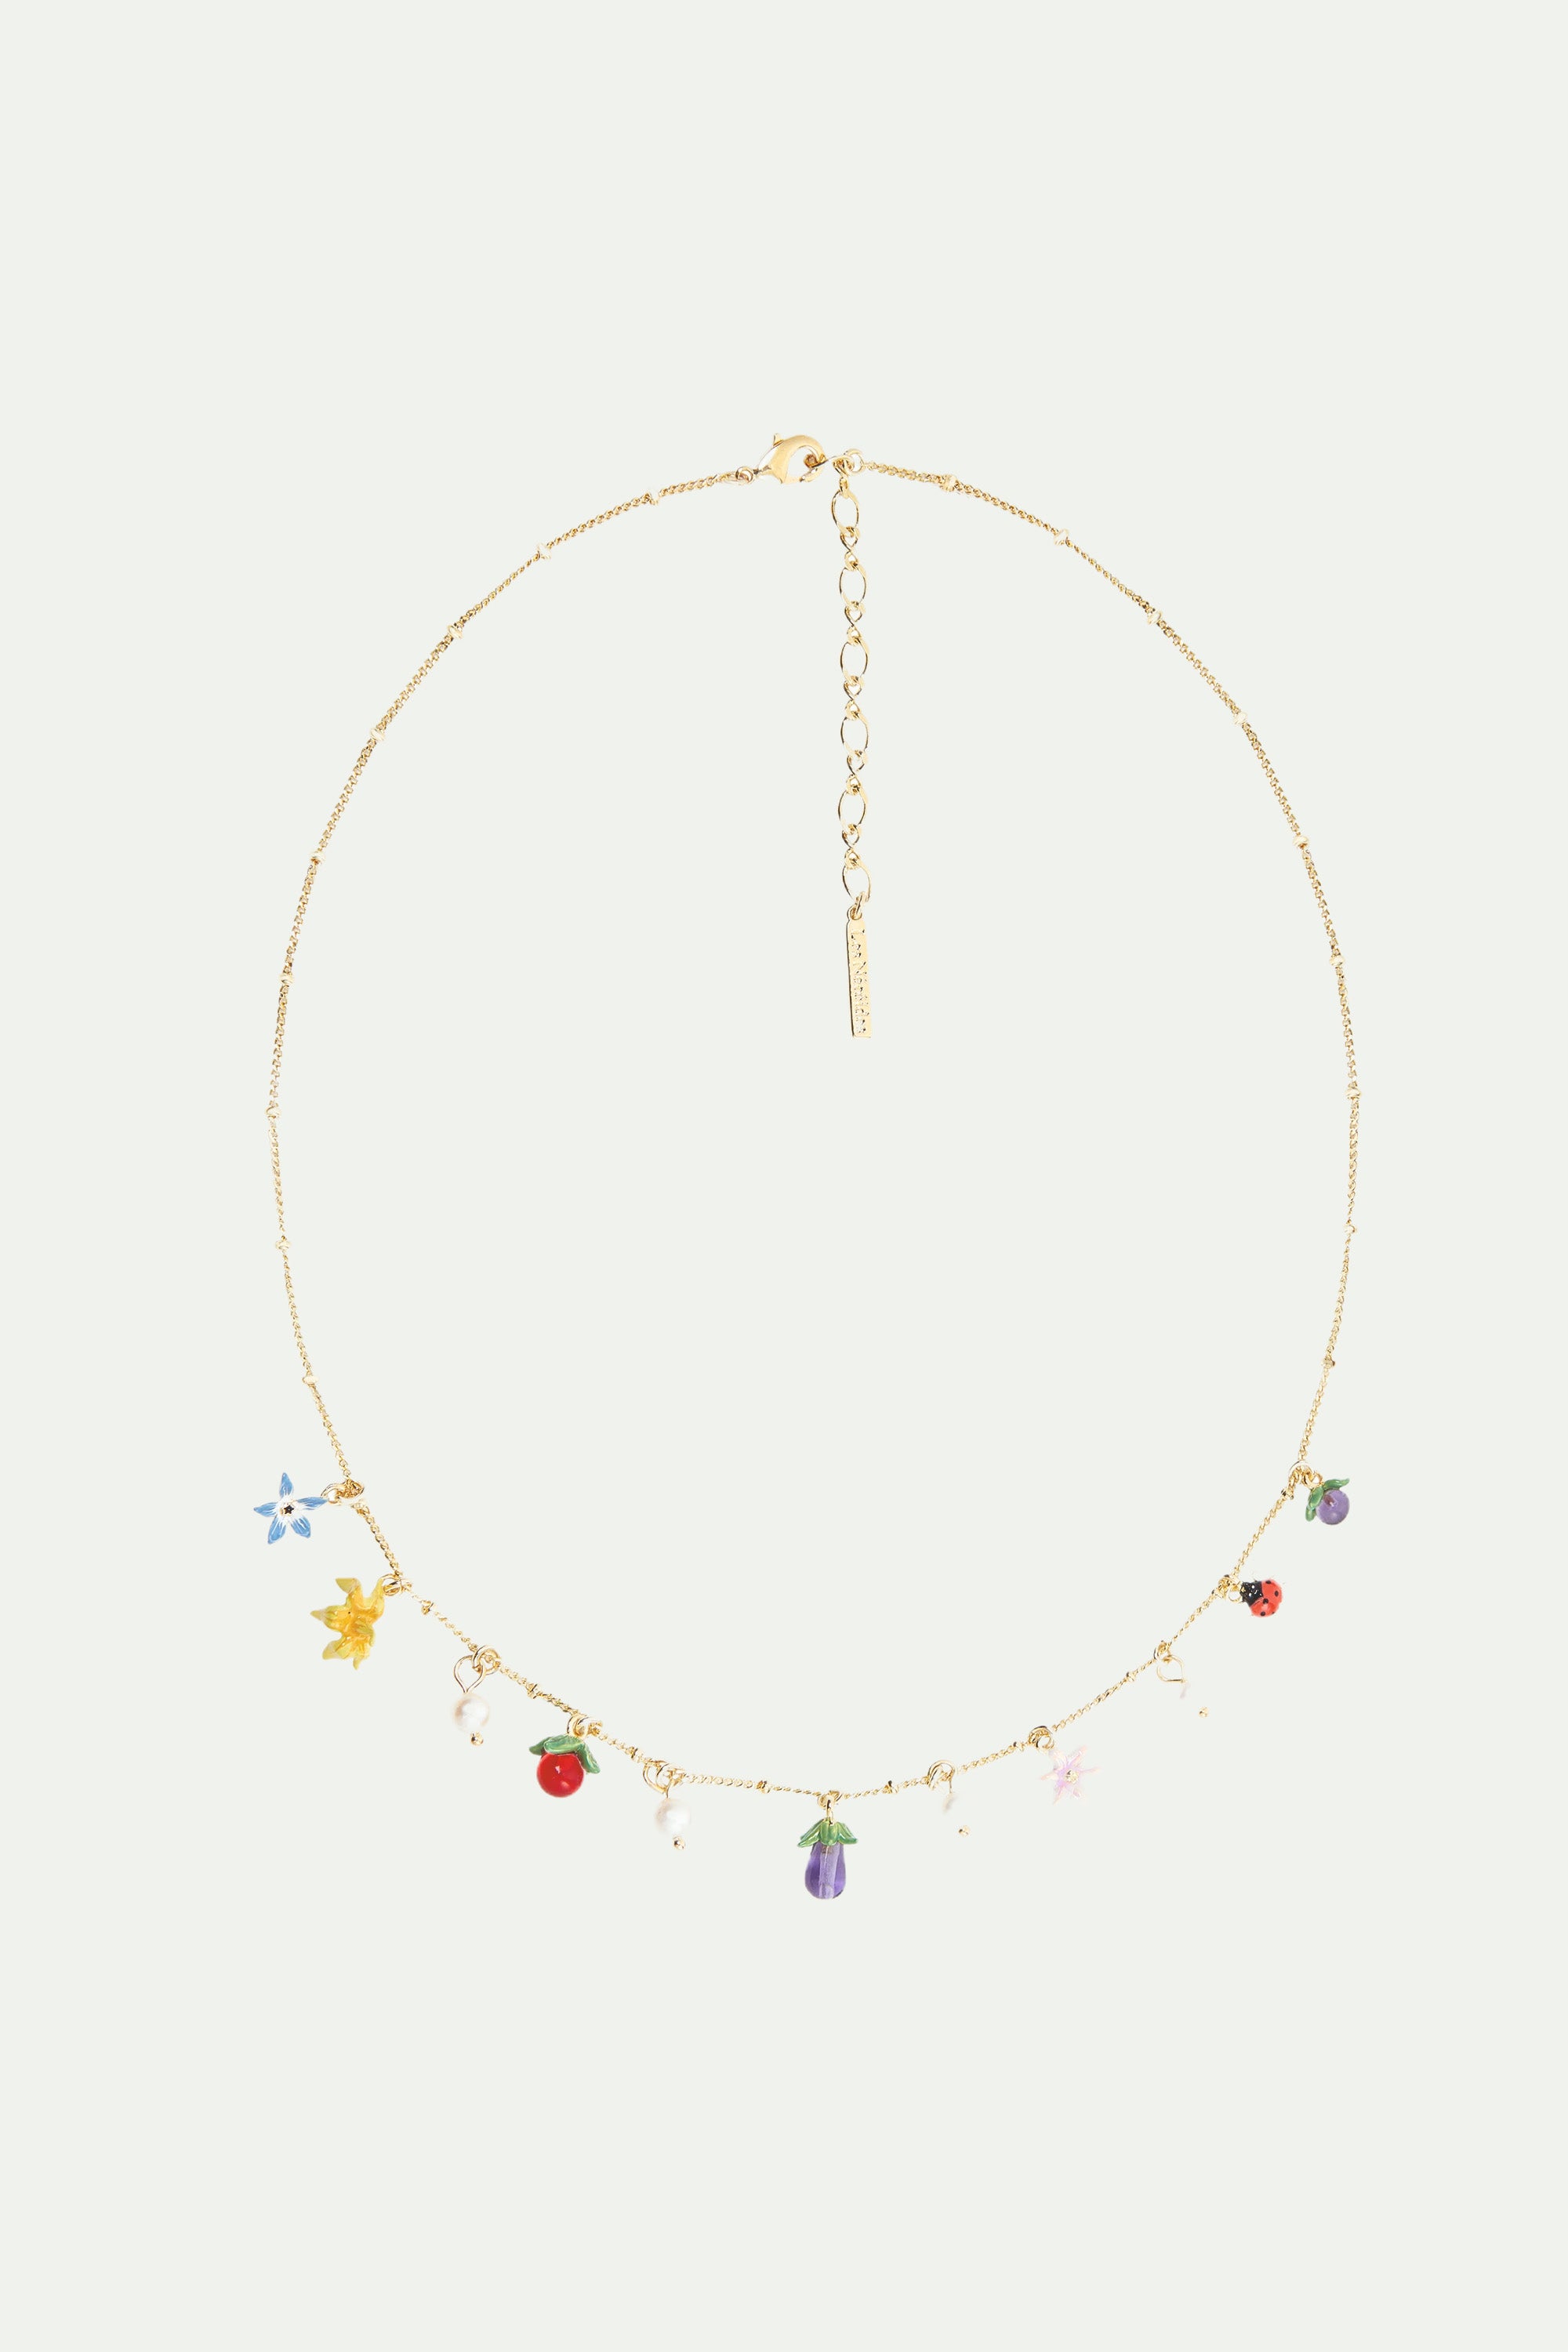 Wonderful vegetable garden and mother-of-pearl charm necklace